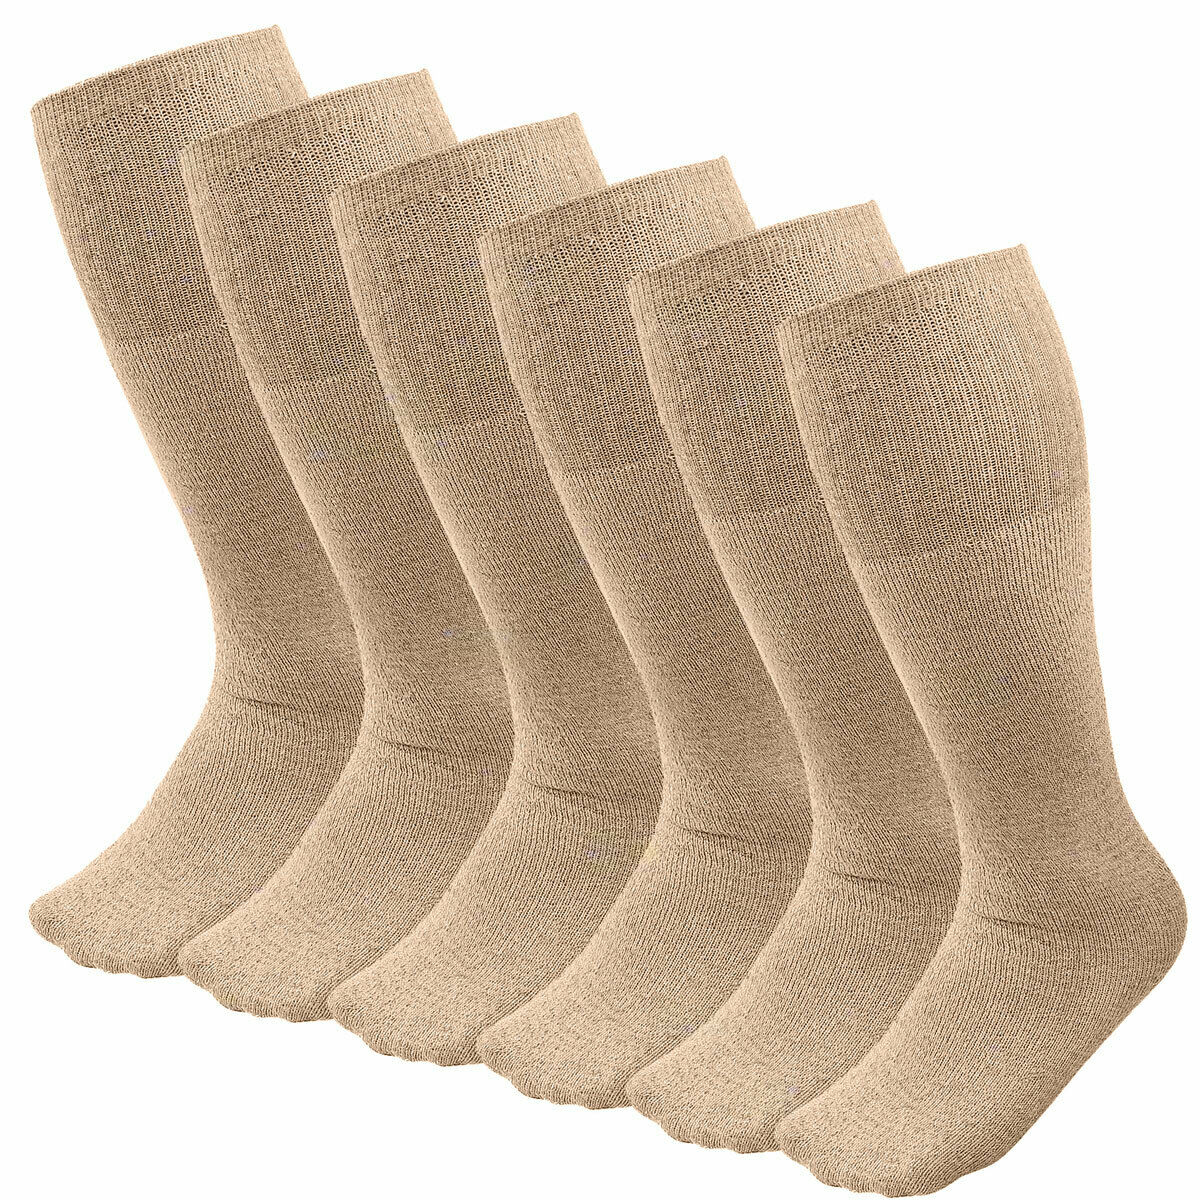 6 Pairs Pack Men's Athletic Tube Socks Running Sports "OVER THE CALF" Full Cushioned Premium Soft Cotton